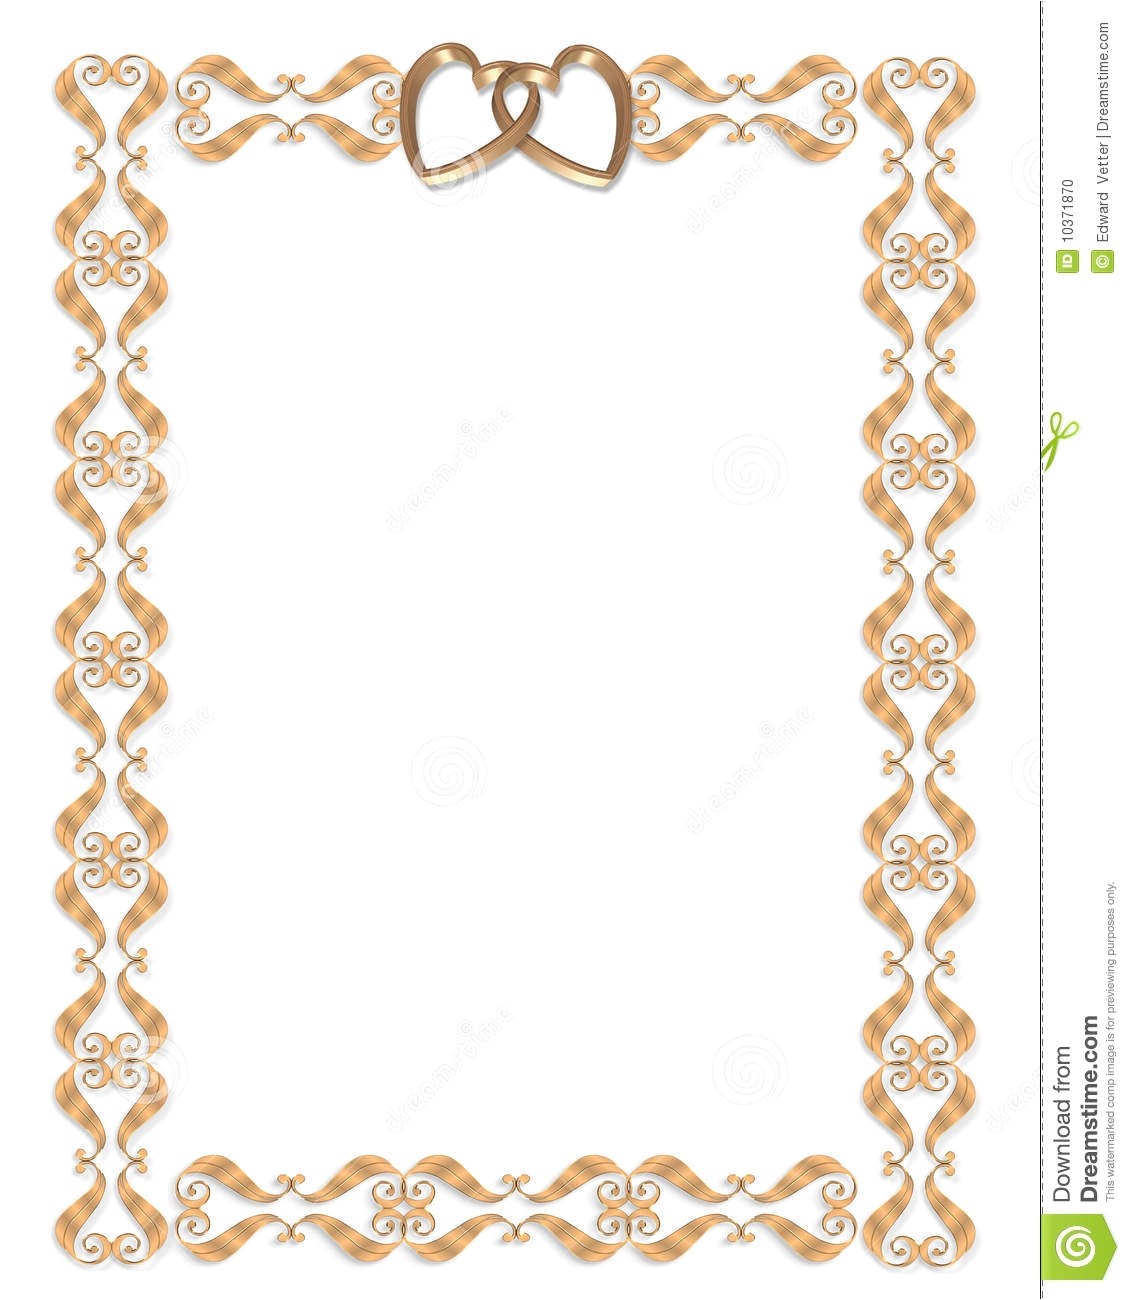 Borders and Frames for Wedding Invitation 6 Incredible Invitation Card Frames Borders Ebookzdb Com